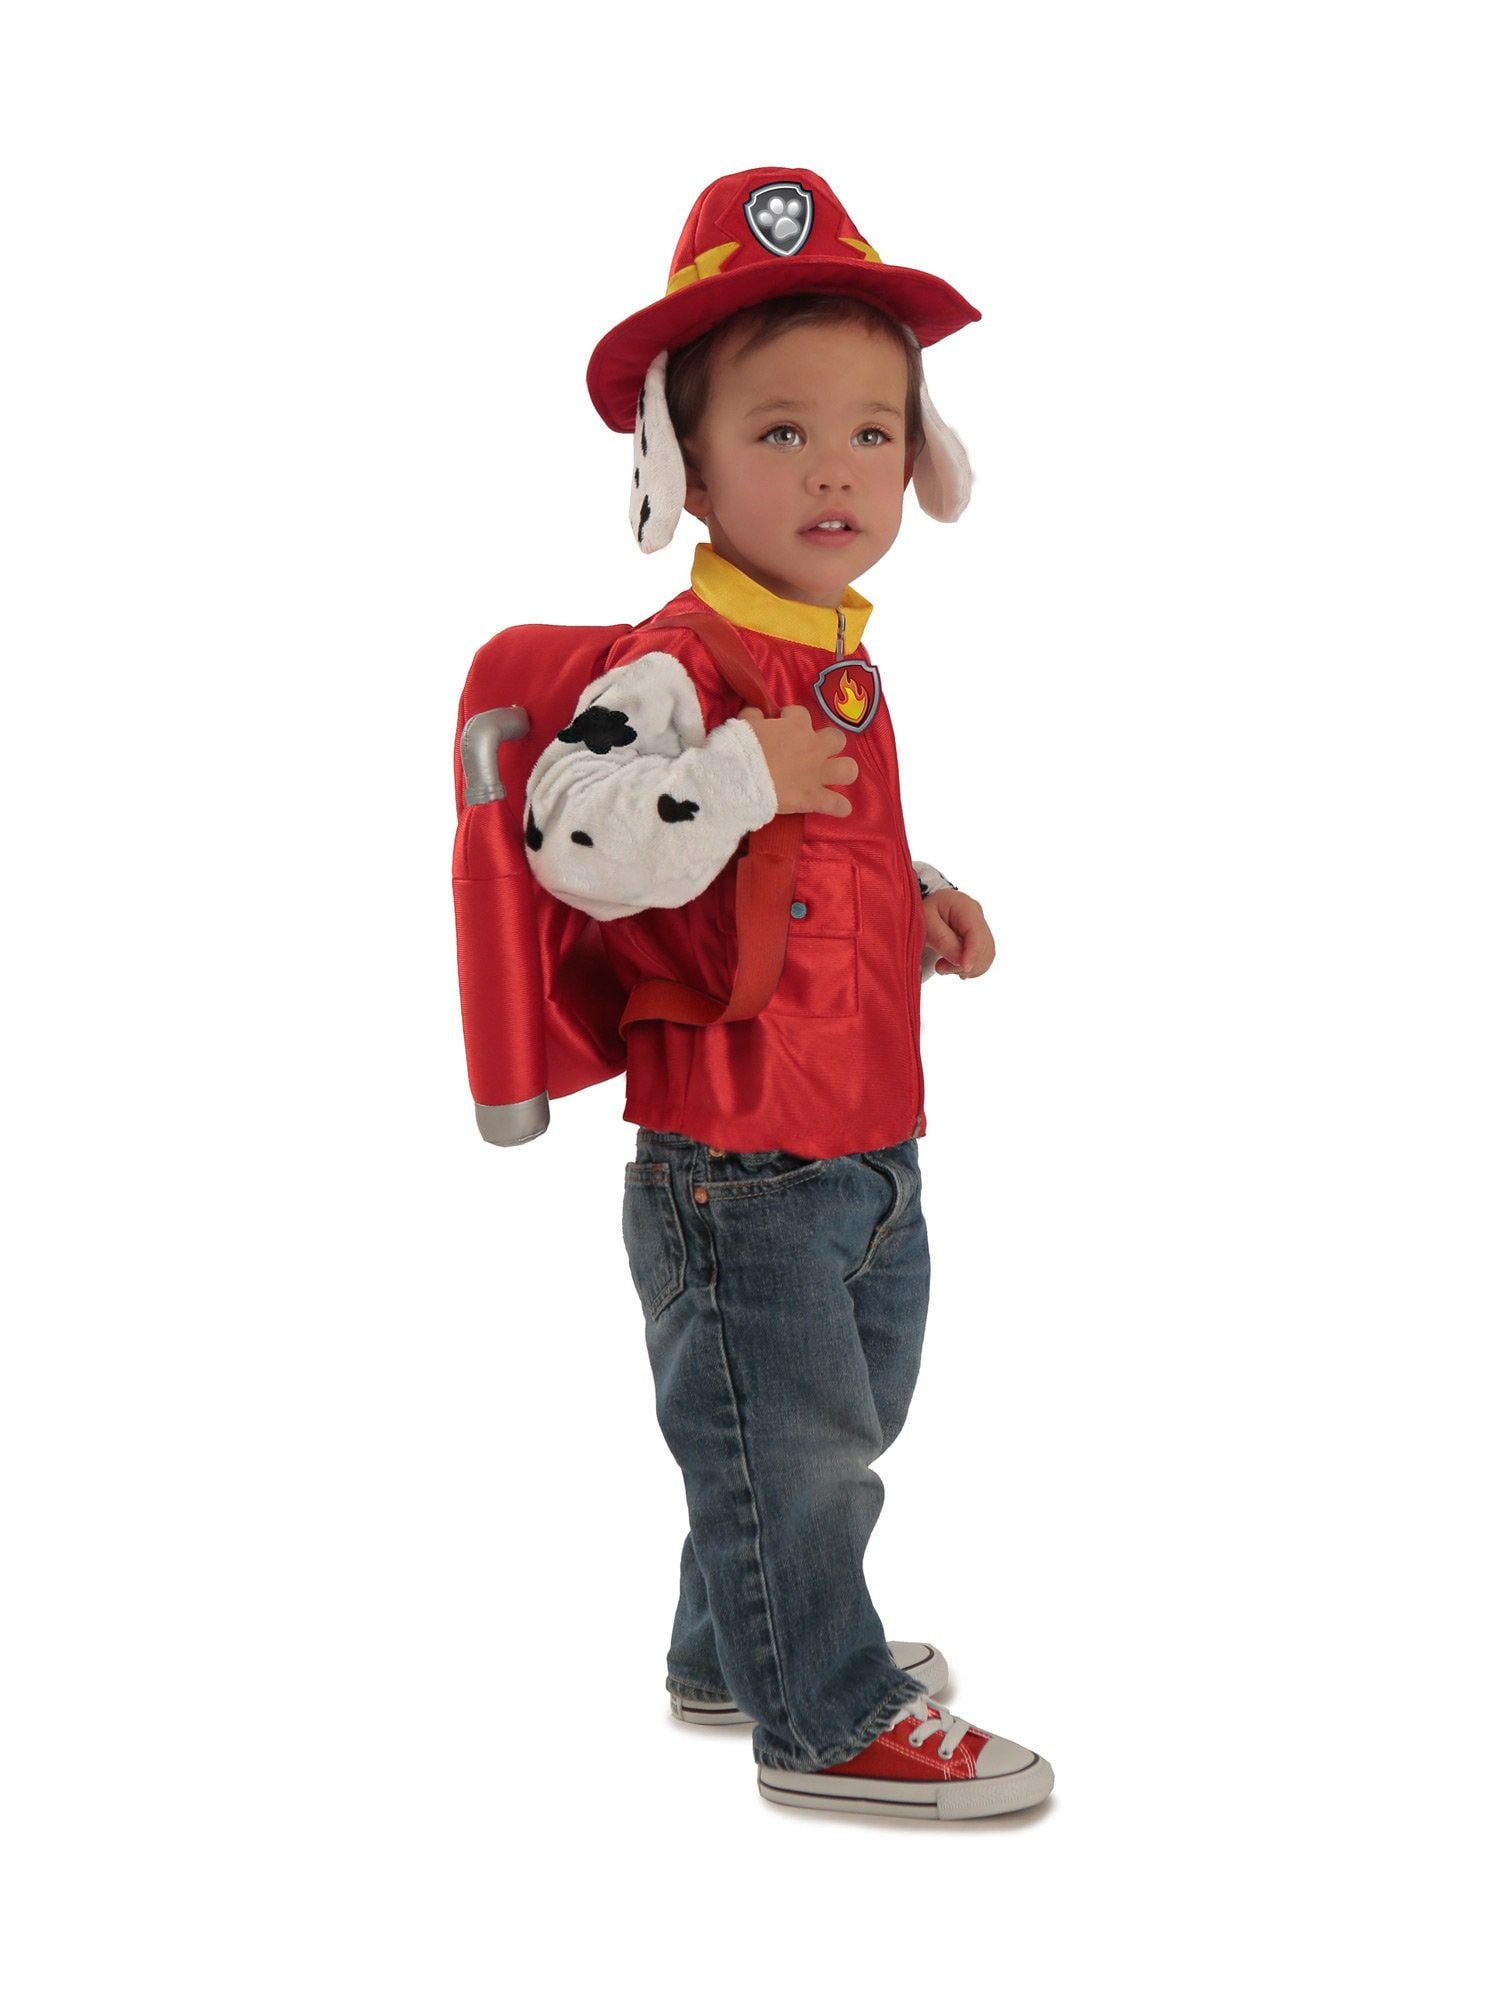 Paw Patrol Marshall Jacket, Hat and Backpack - costumes.com